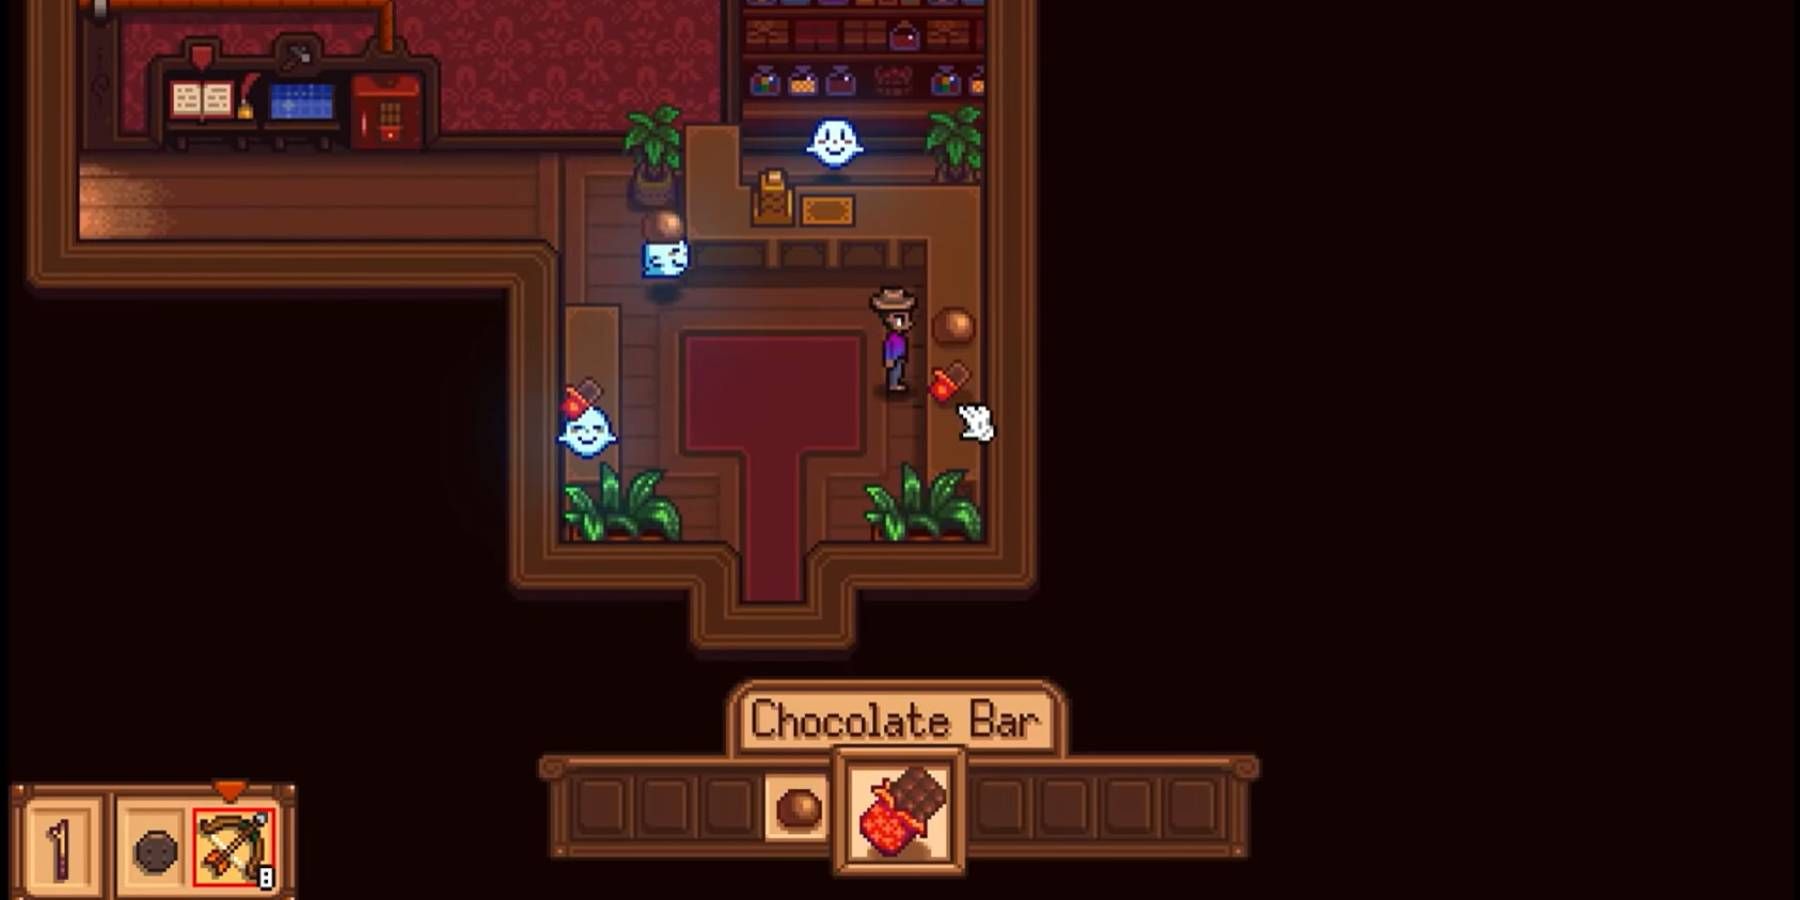 The player setting up the shop in Haunted Chocolatier